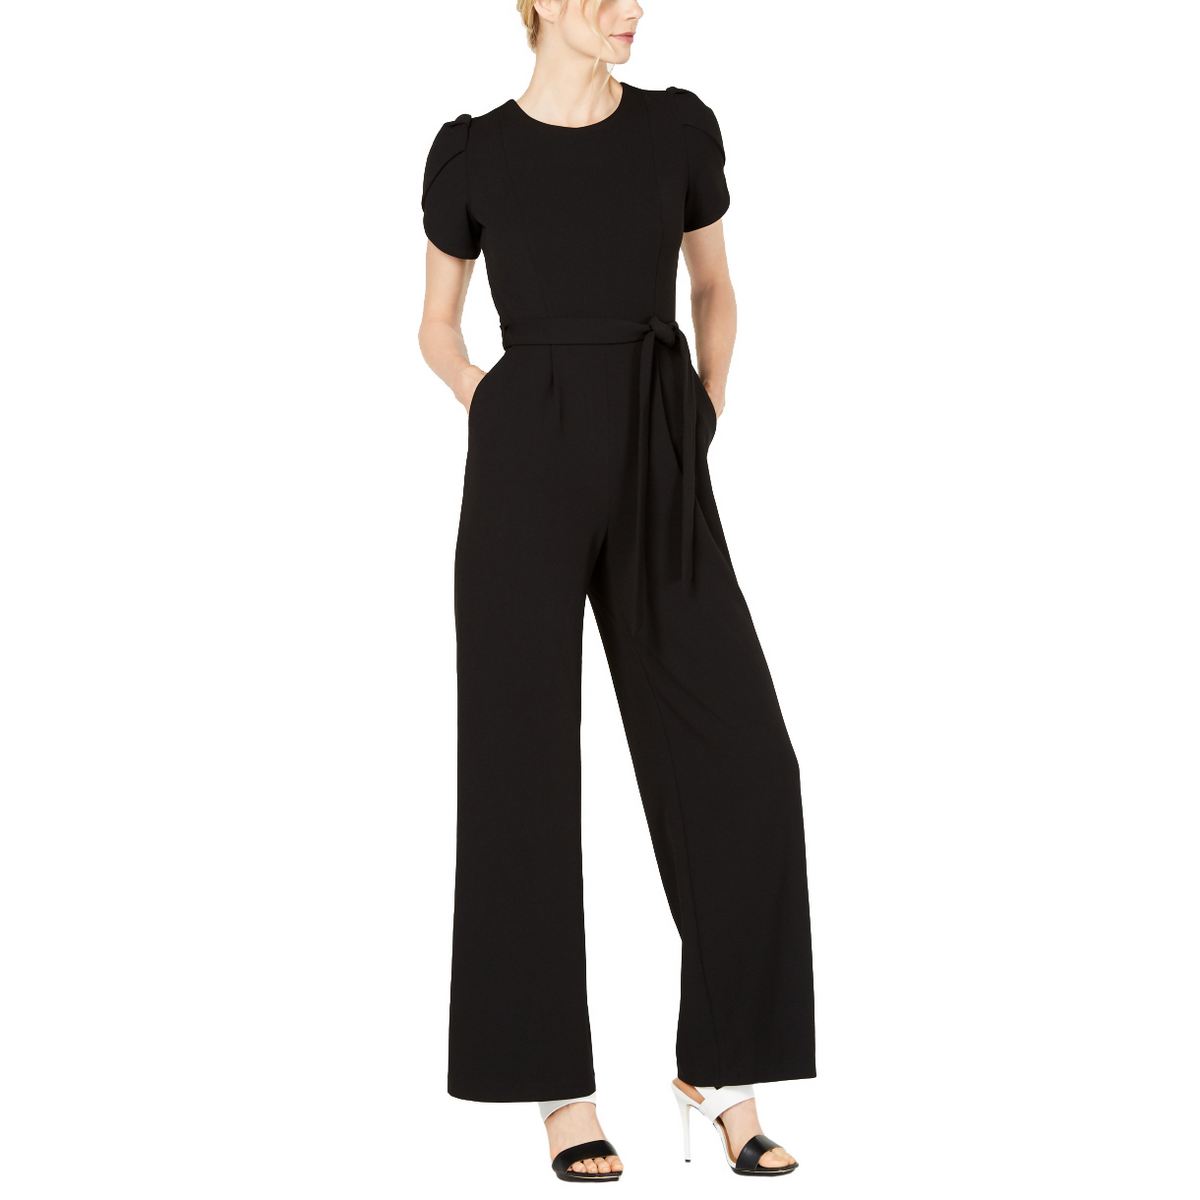 CALVIN KLEIN NEW Women's Black Solid Puff-sleeve Belted Jumpsuit 12 ...